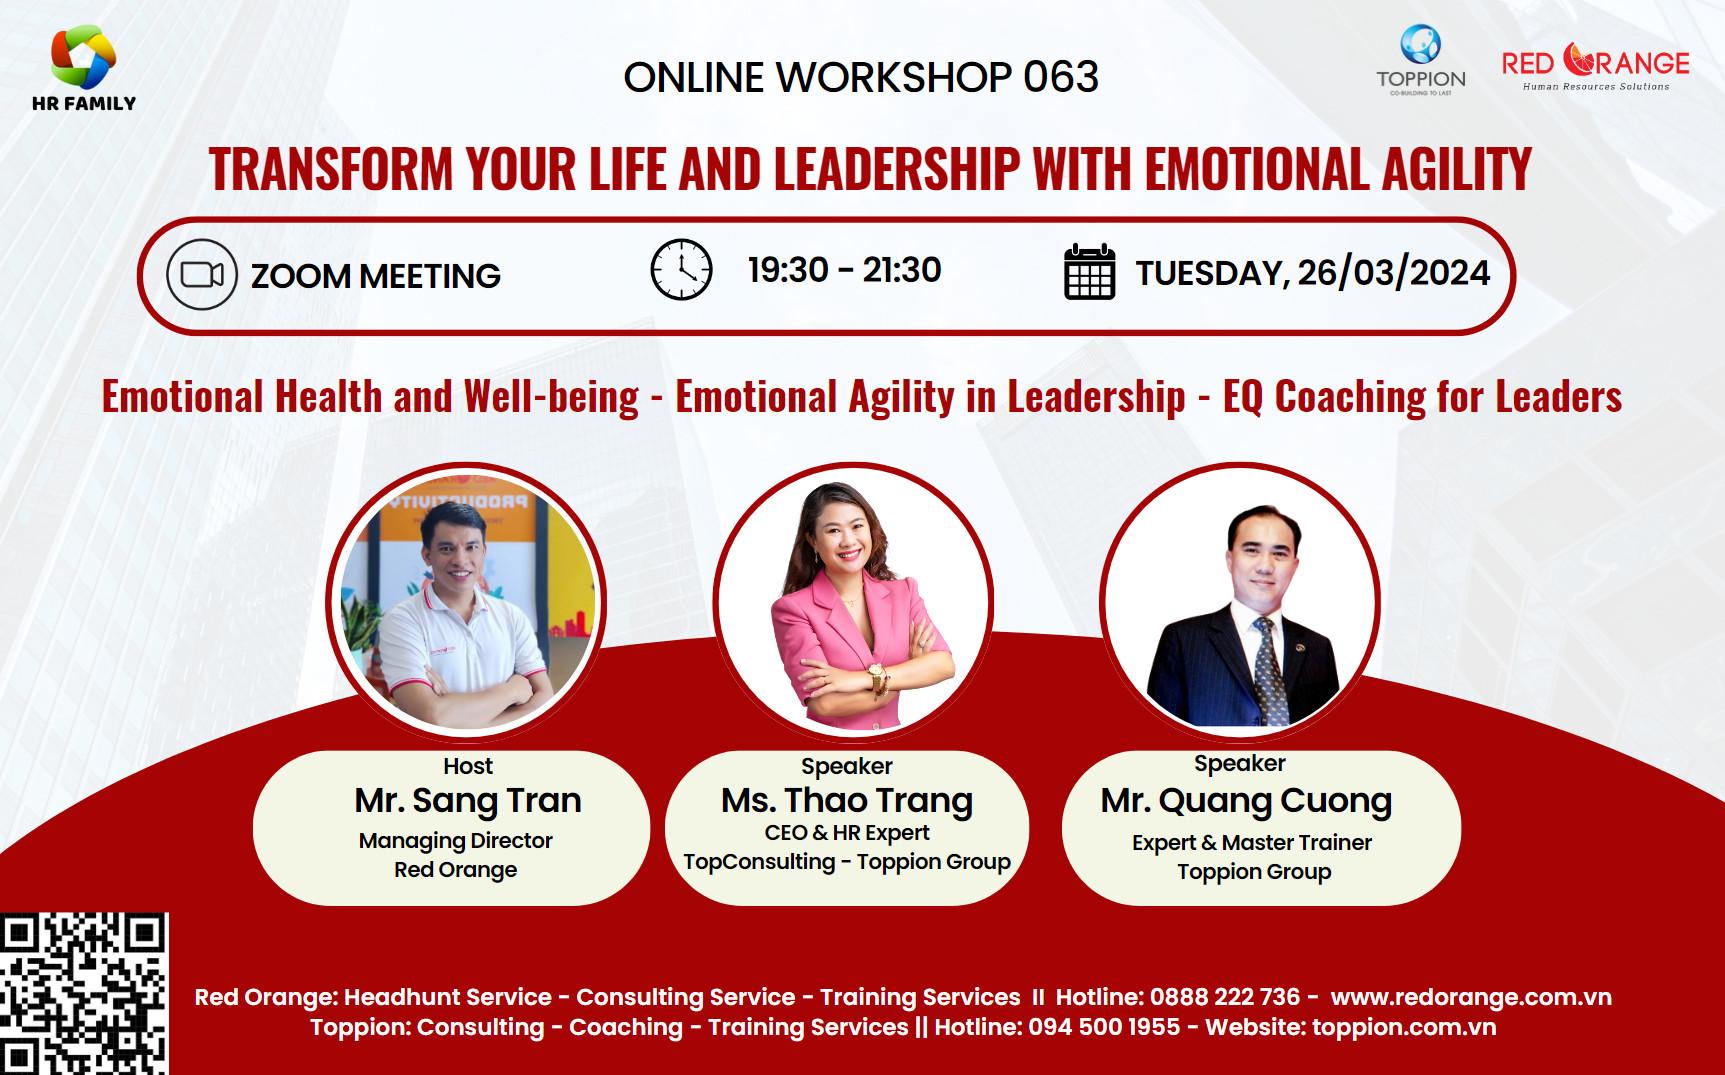 ONLINE WORKSHOP SỐ 063 _TRANSFORM YOUR LIFE AND LEADERSHIP WITH EMOTIONAL AGILITY- 26/3